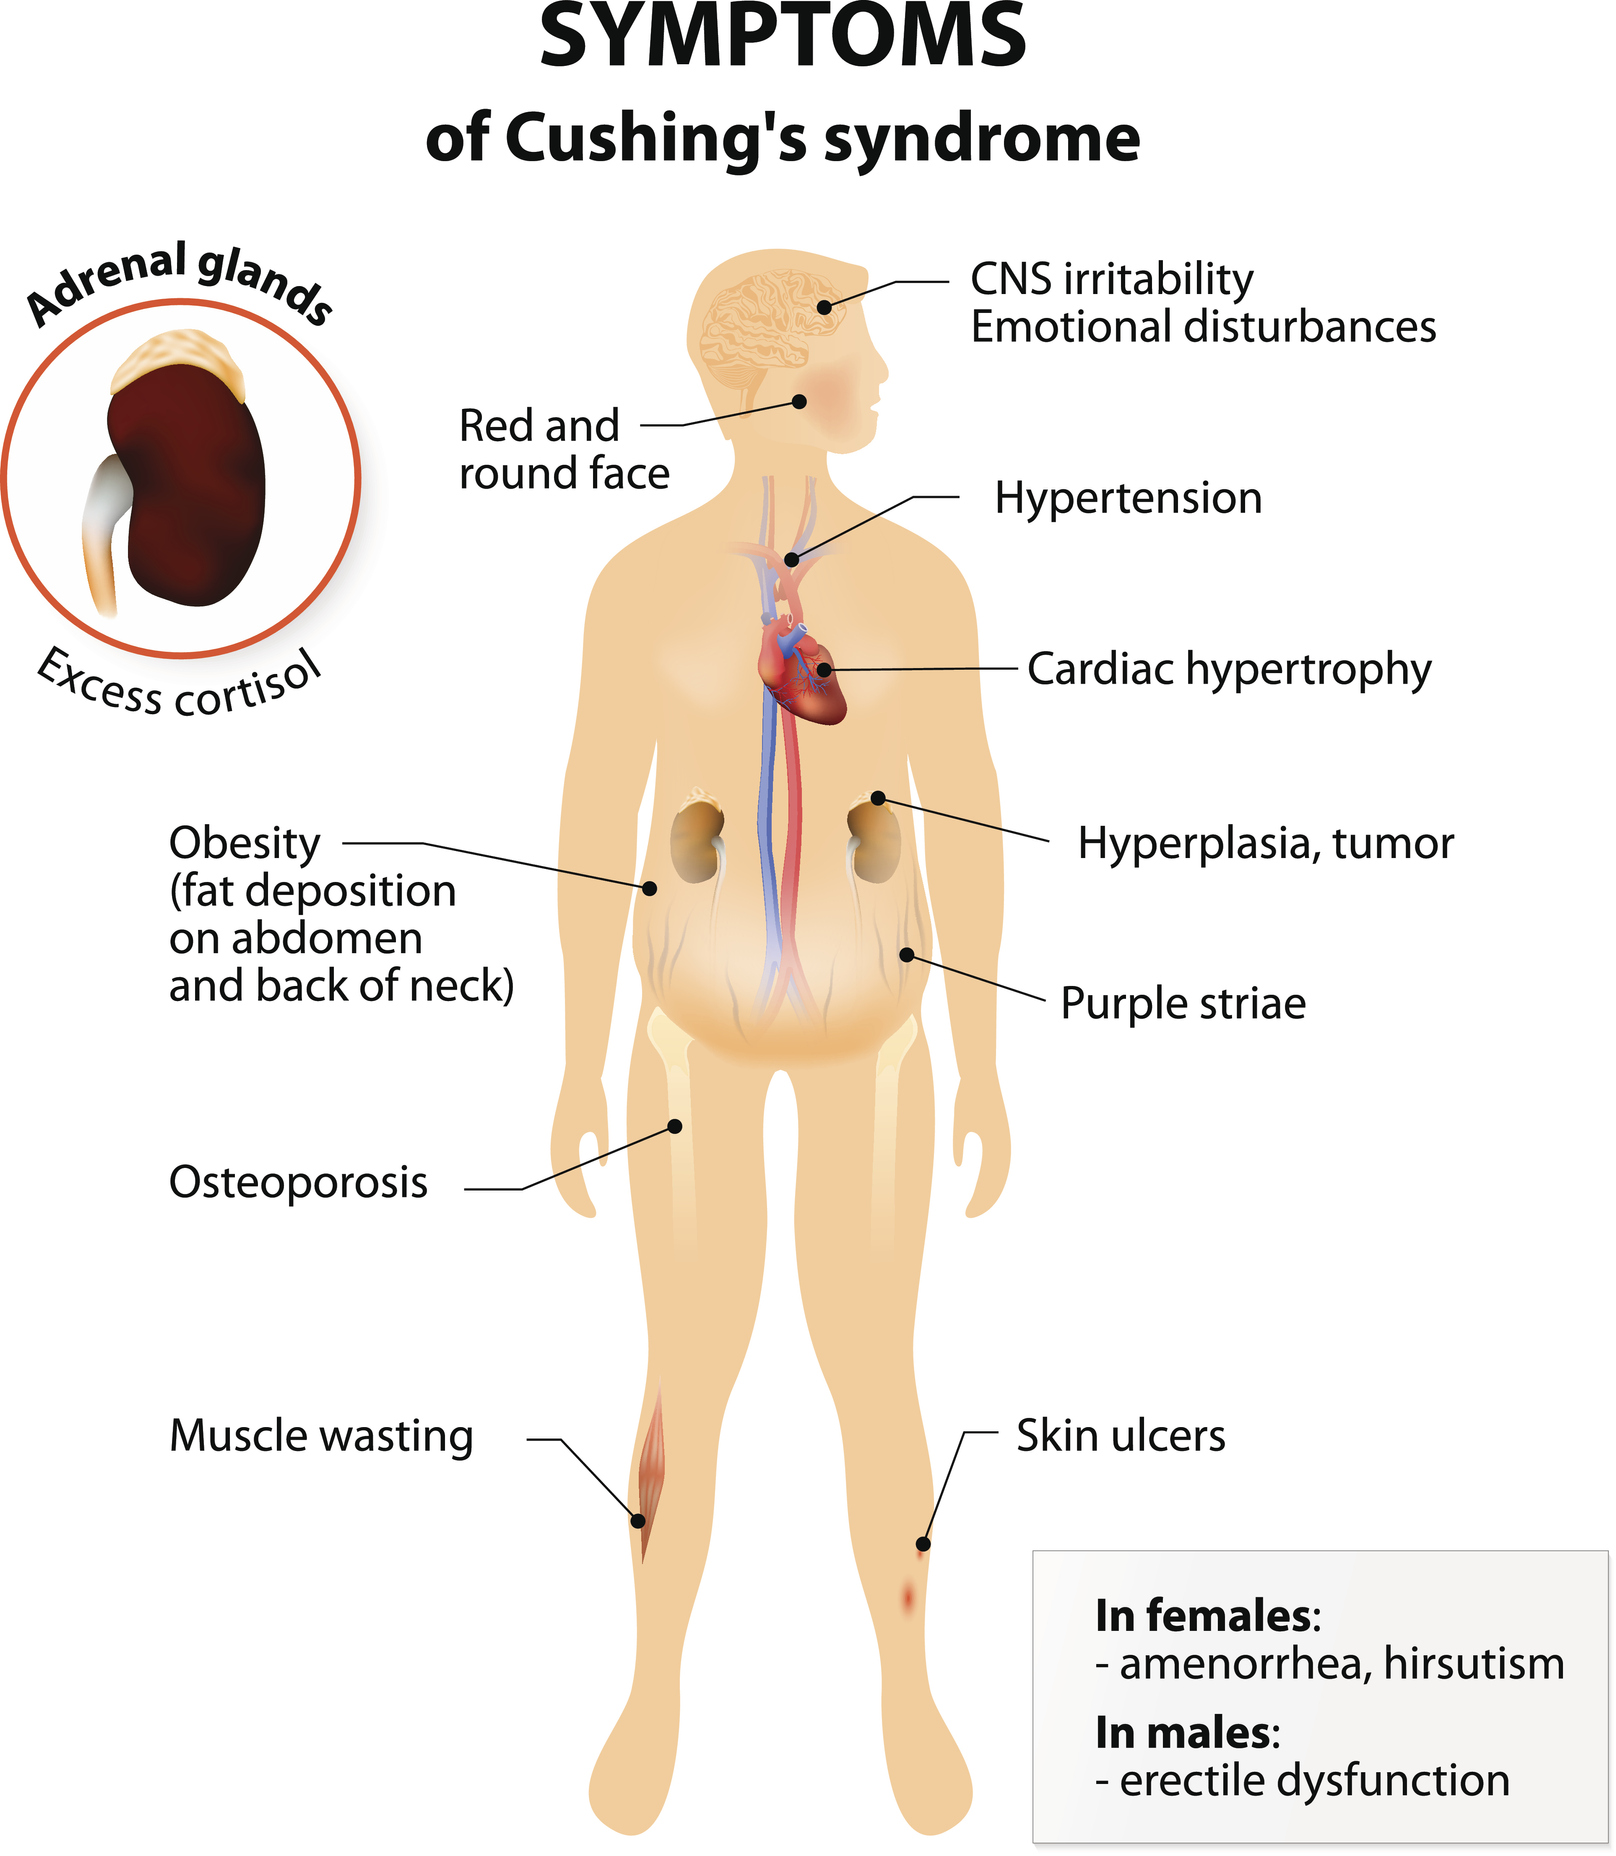 Pituitary Center | Diagram of Cushings Syndrome (Cushing's Syndrome) symptoms